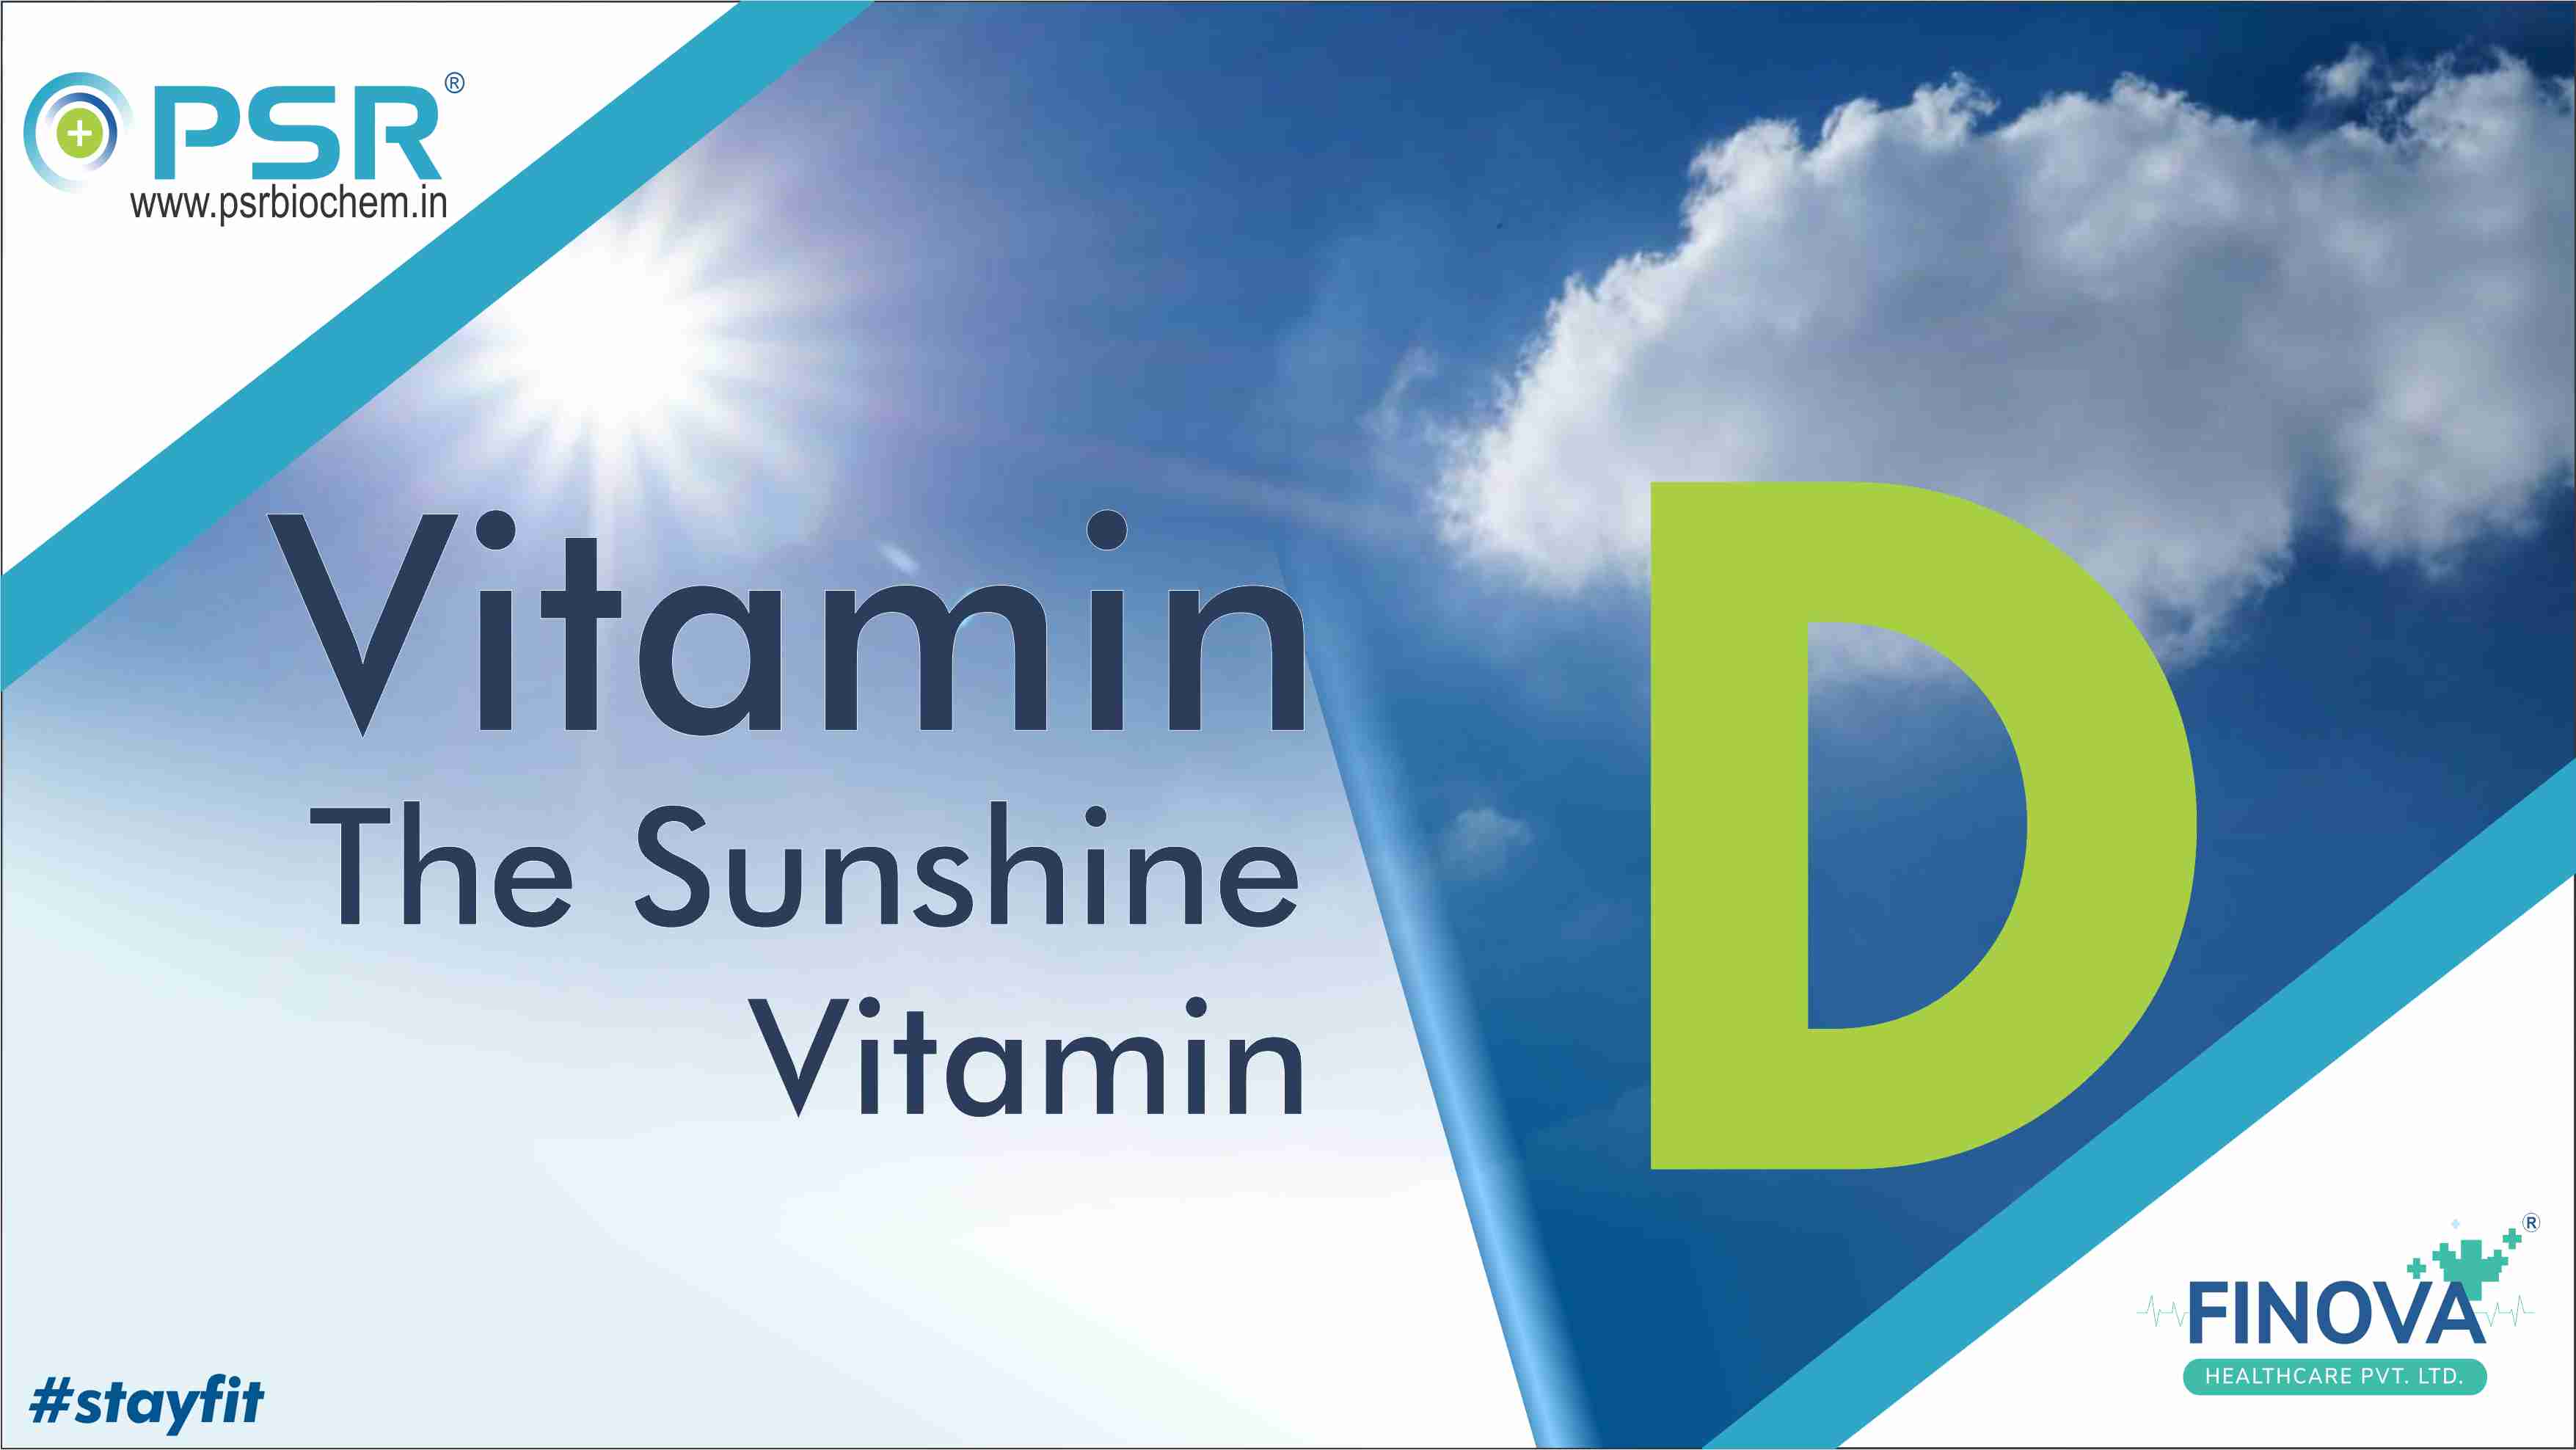 Vitamin D Deficiency is a Global Health concern that Affects.....